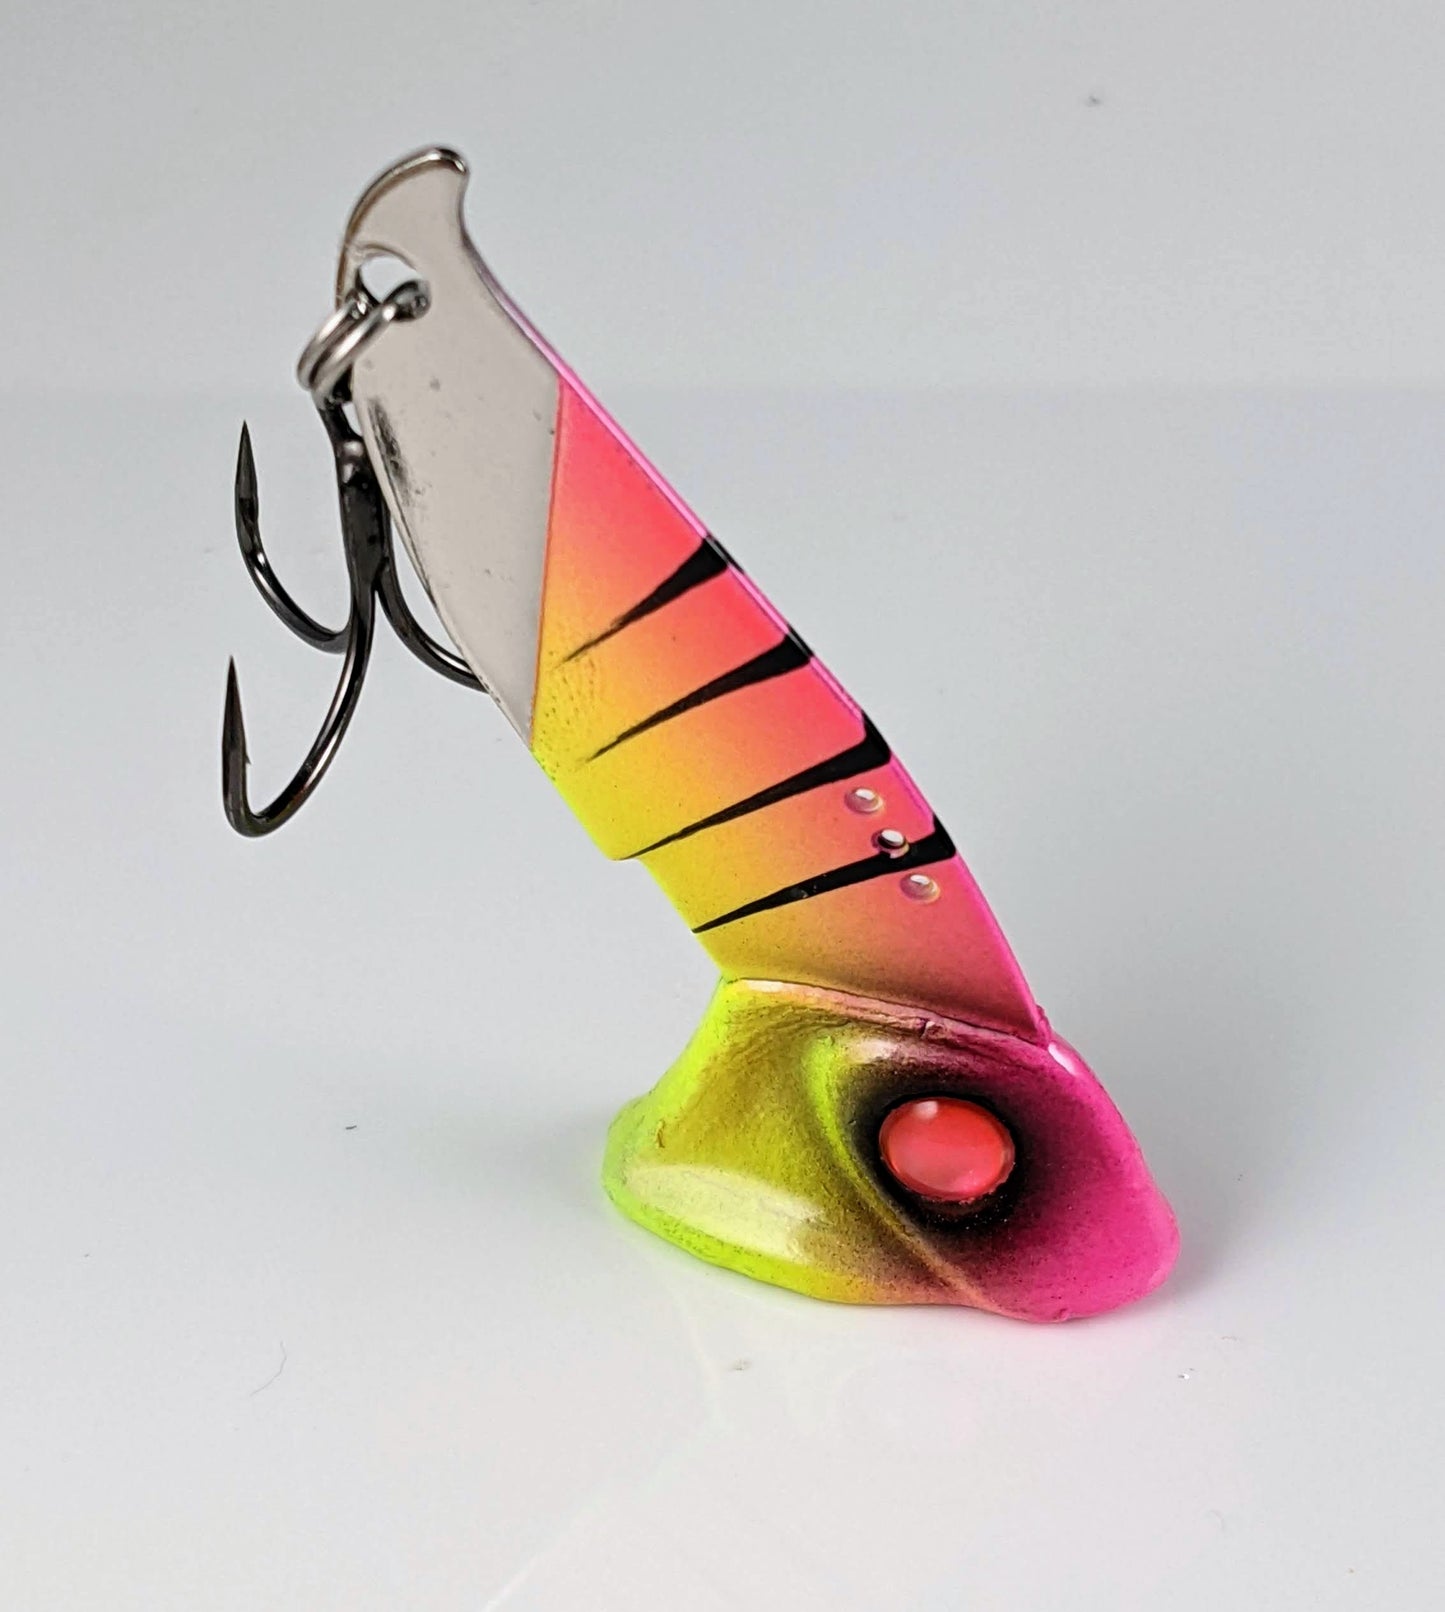 Vertical Jigs and Lures - Vertical Minnow Blade Bait - Sunset - Vertical Jigs and Lures Custom Vertical Minnow